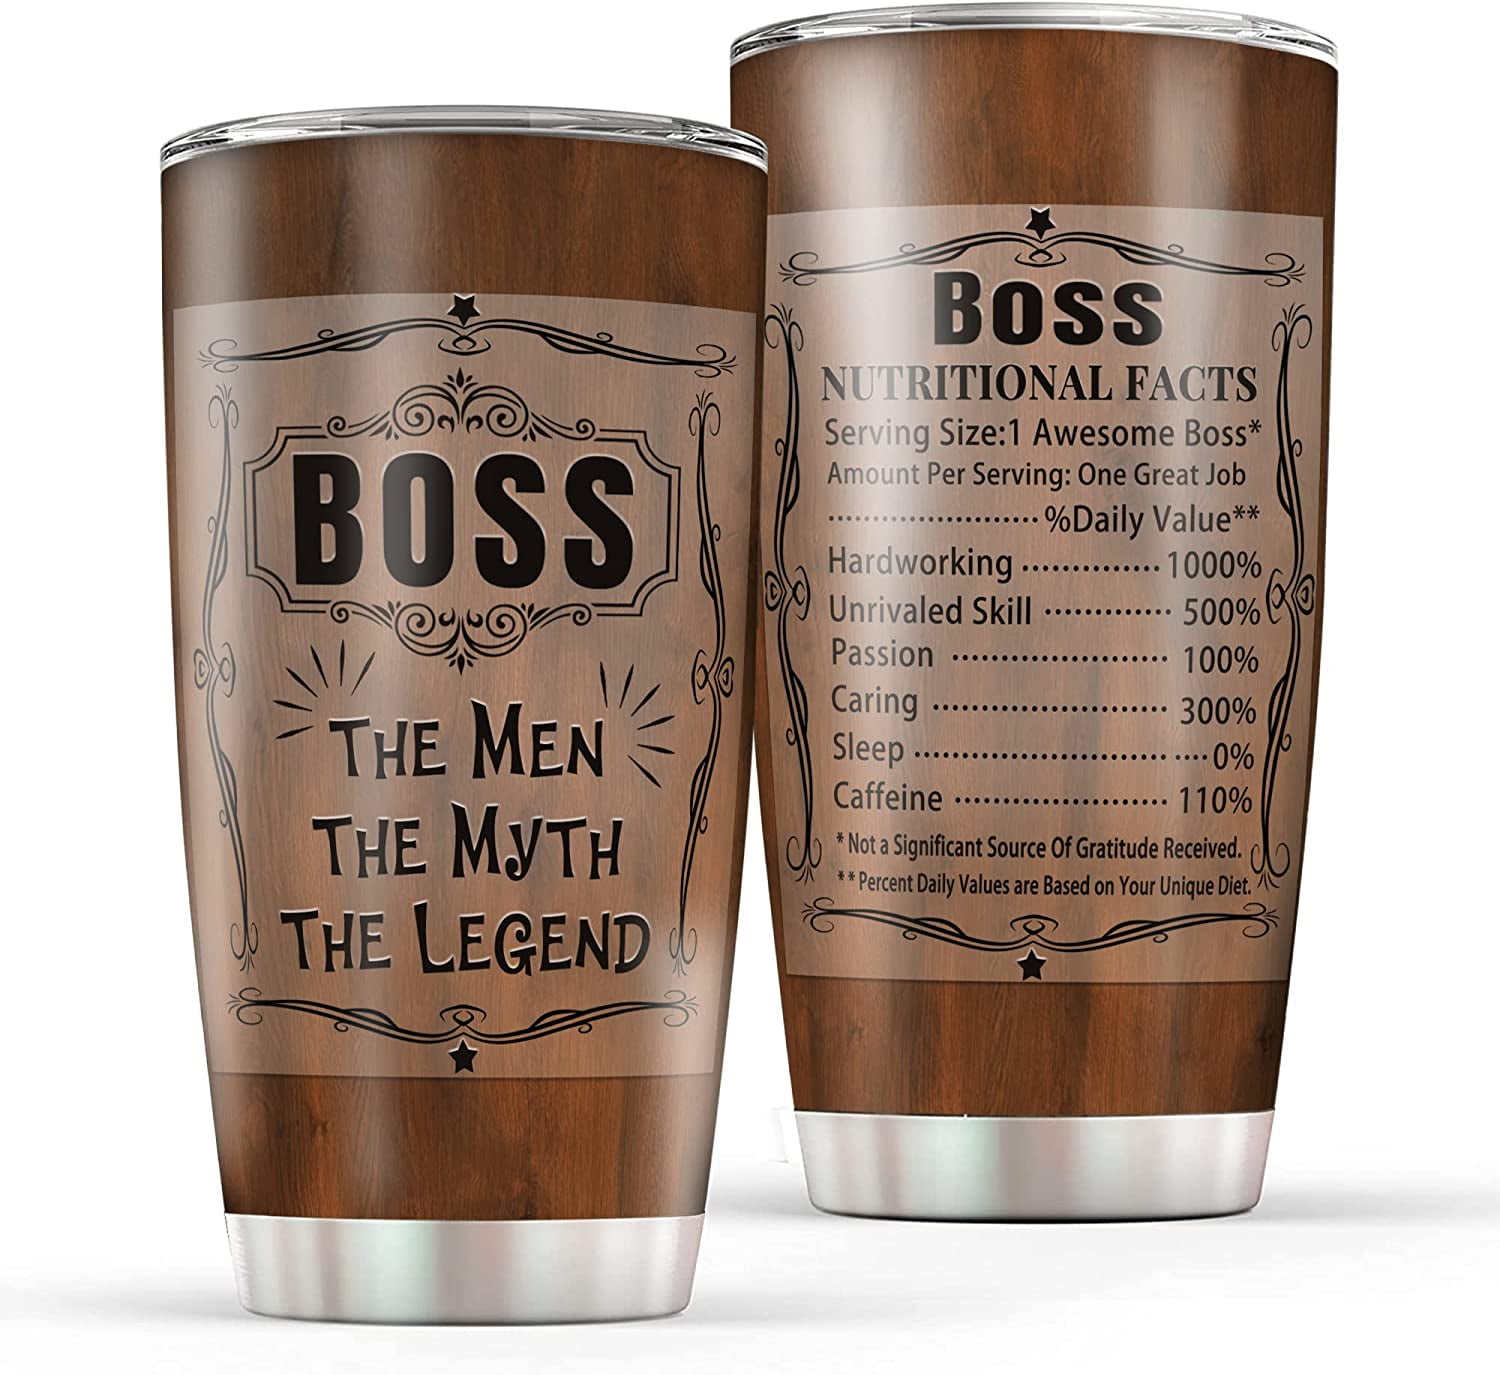 40 Best Gifts for Your Boss in 2023 - Thoughtful Boss Gift Ideas